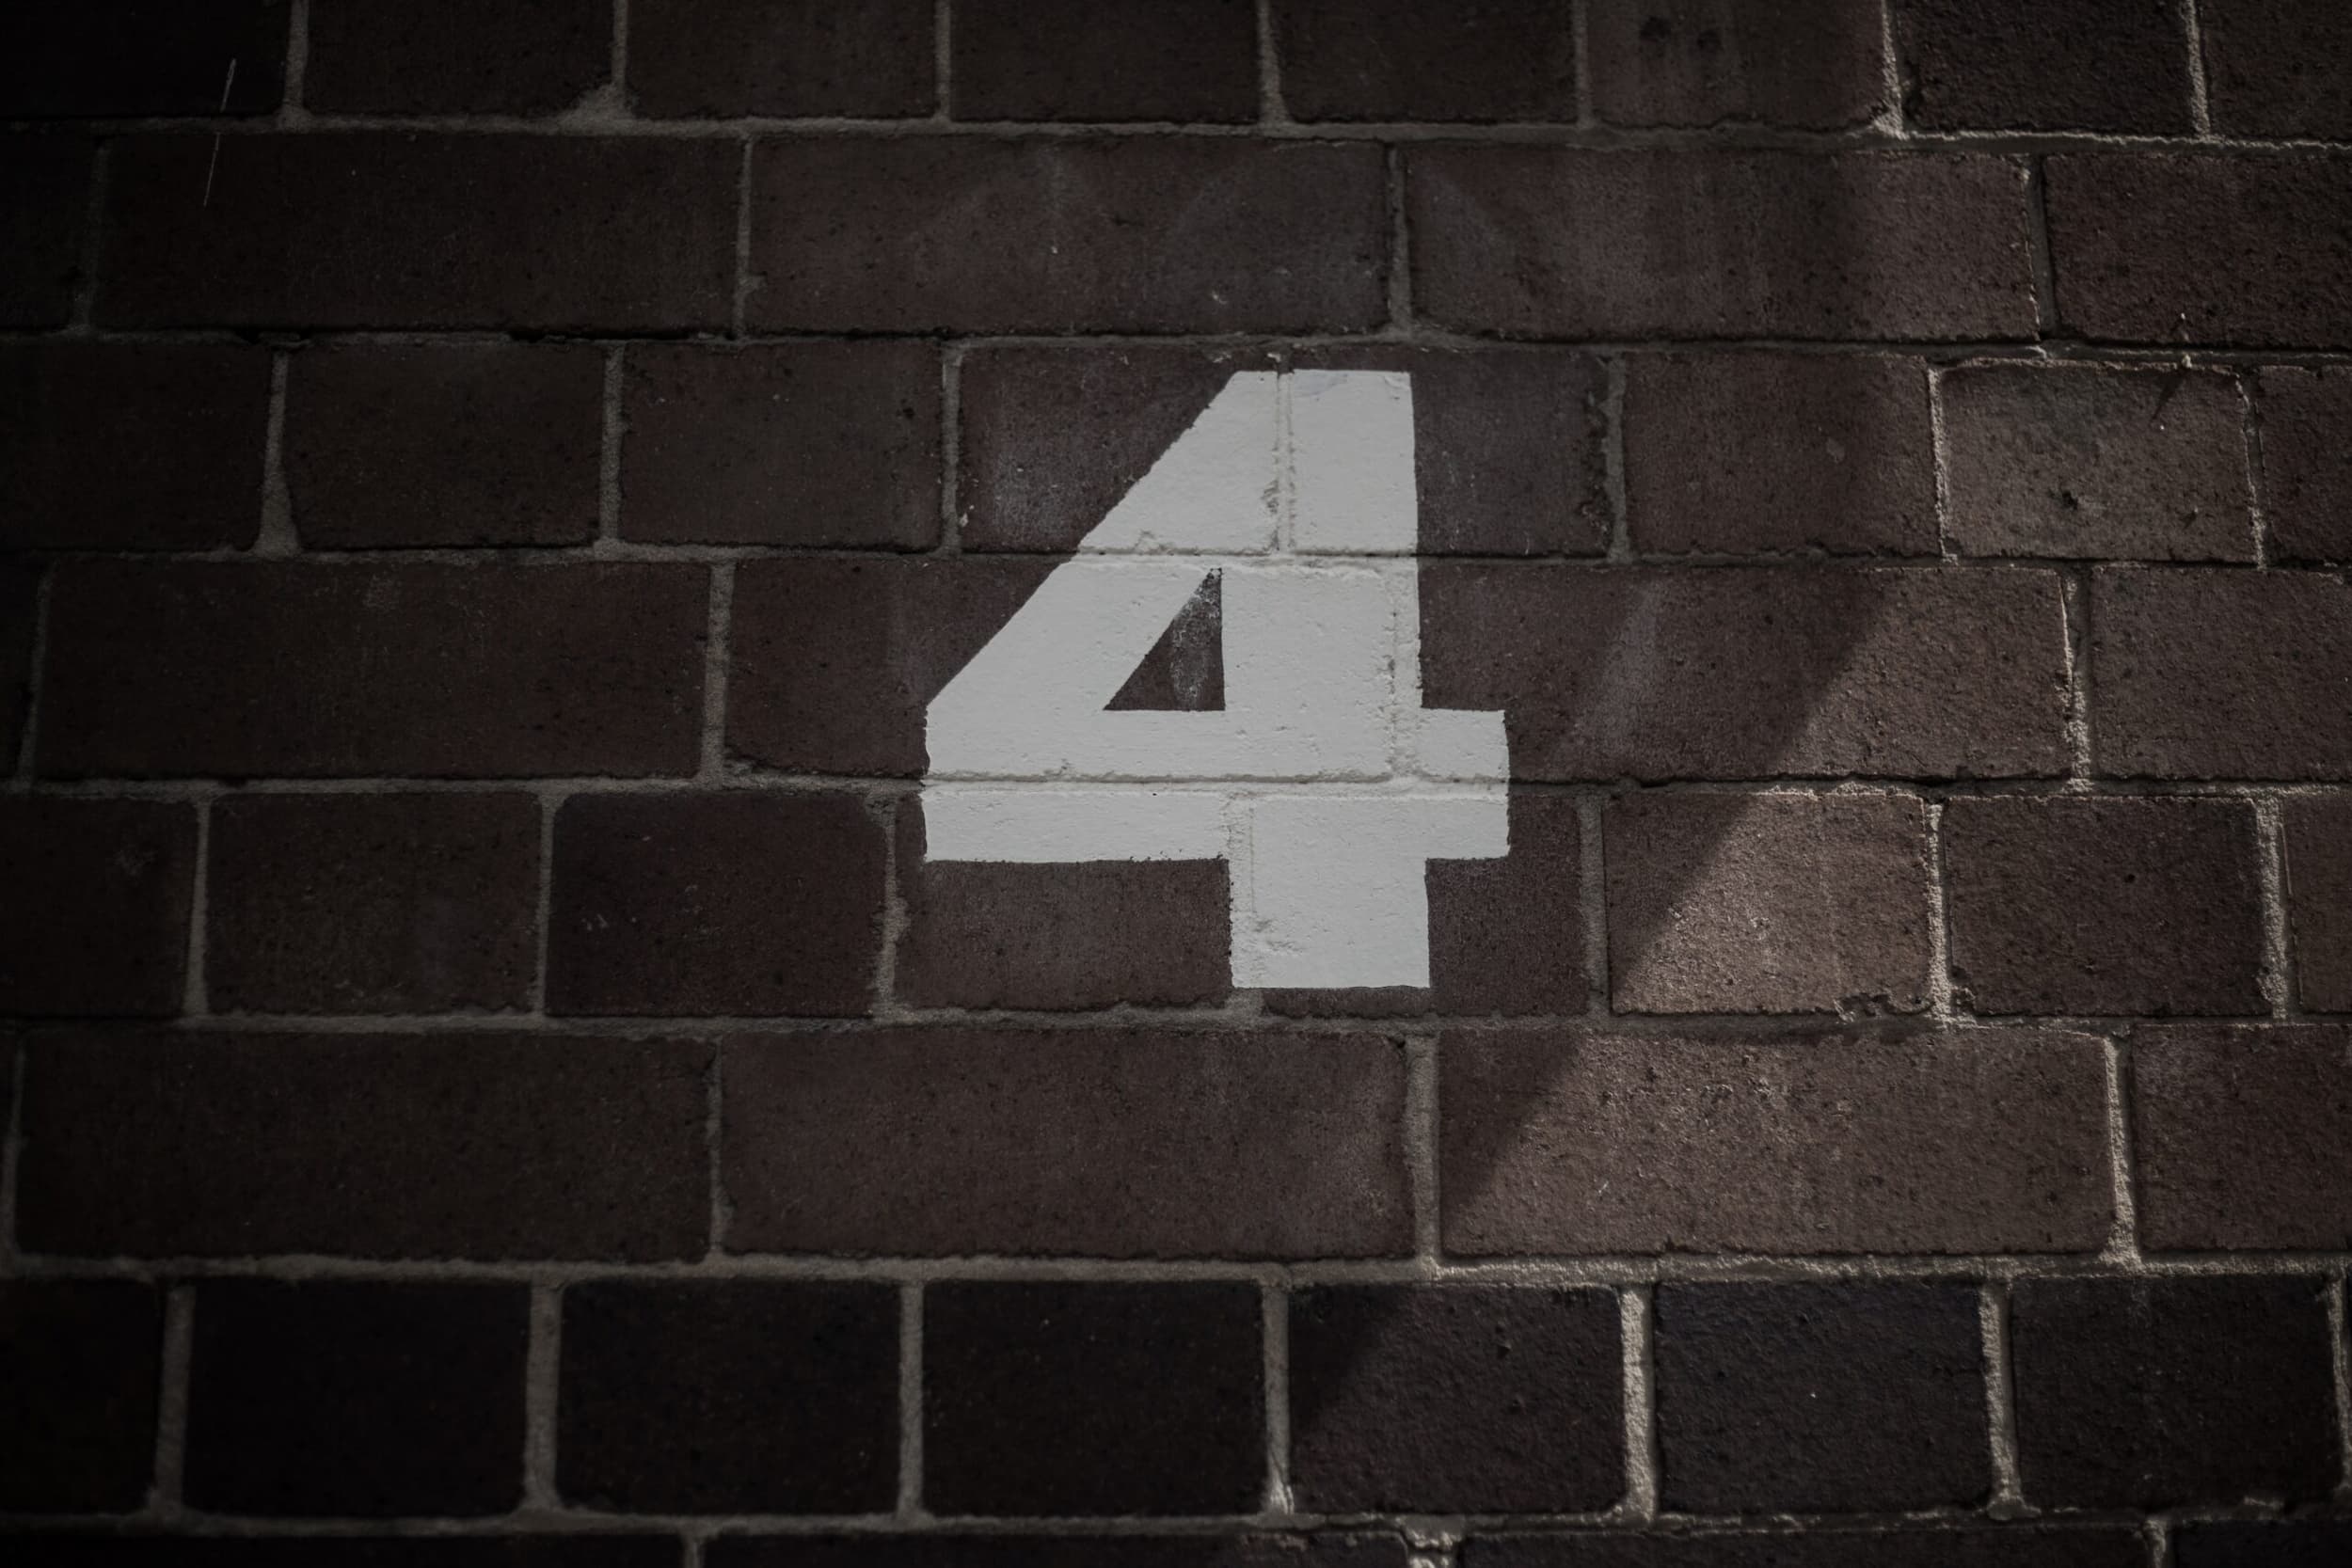 Photo of number 4 painting on a brick wall